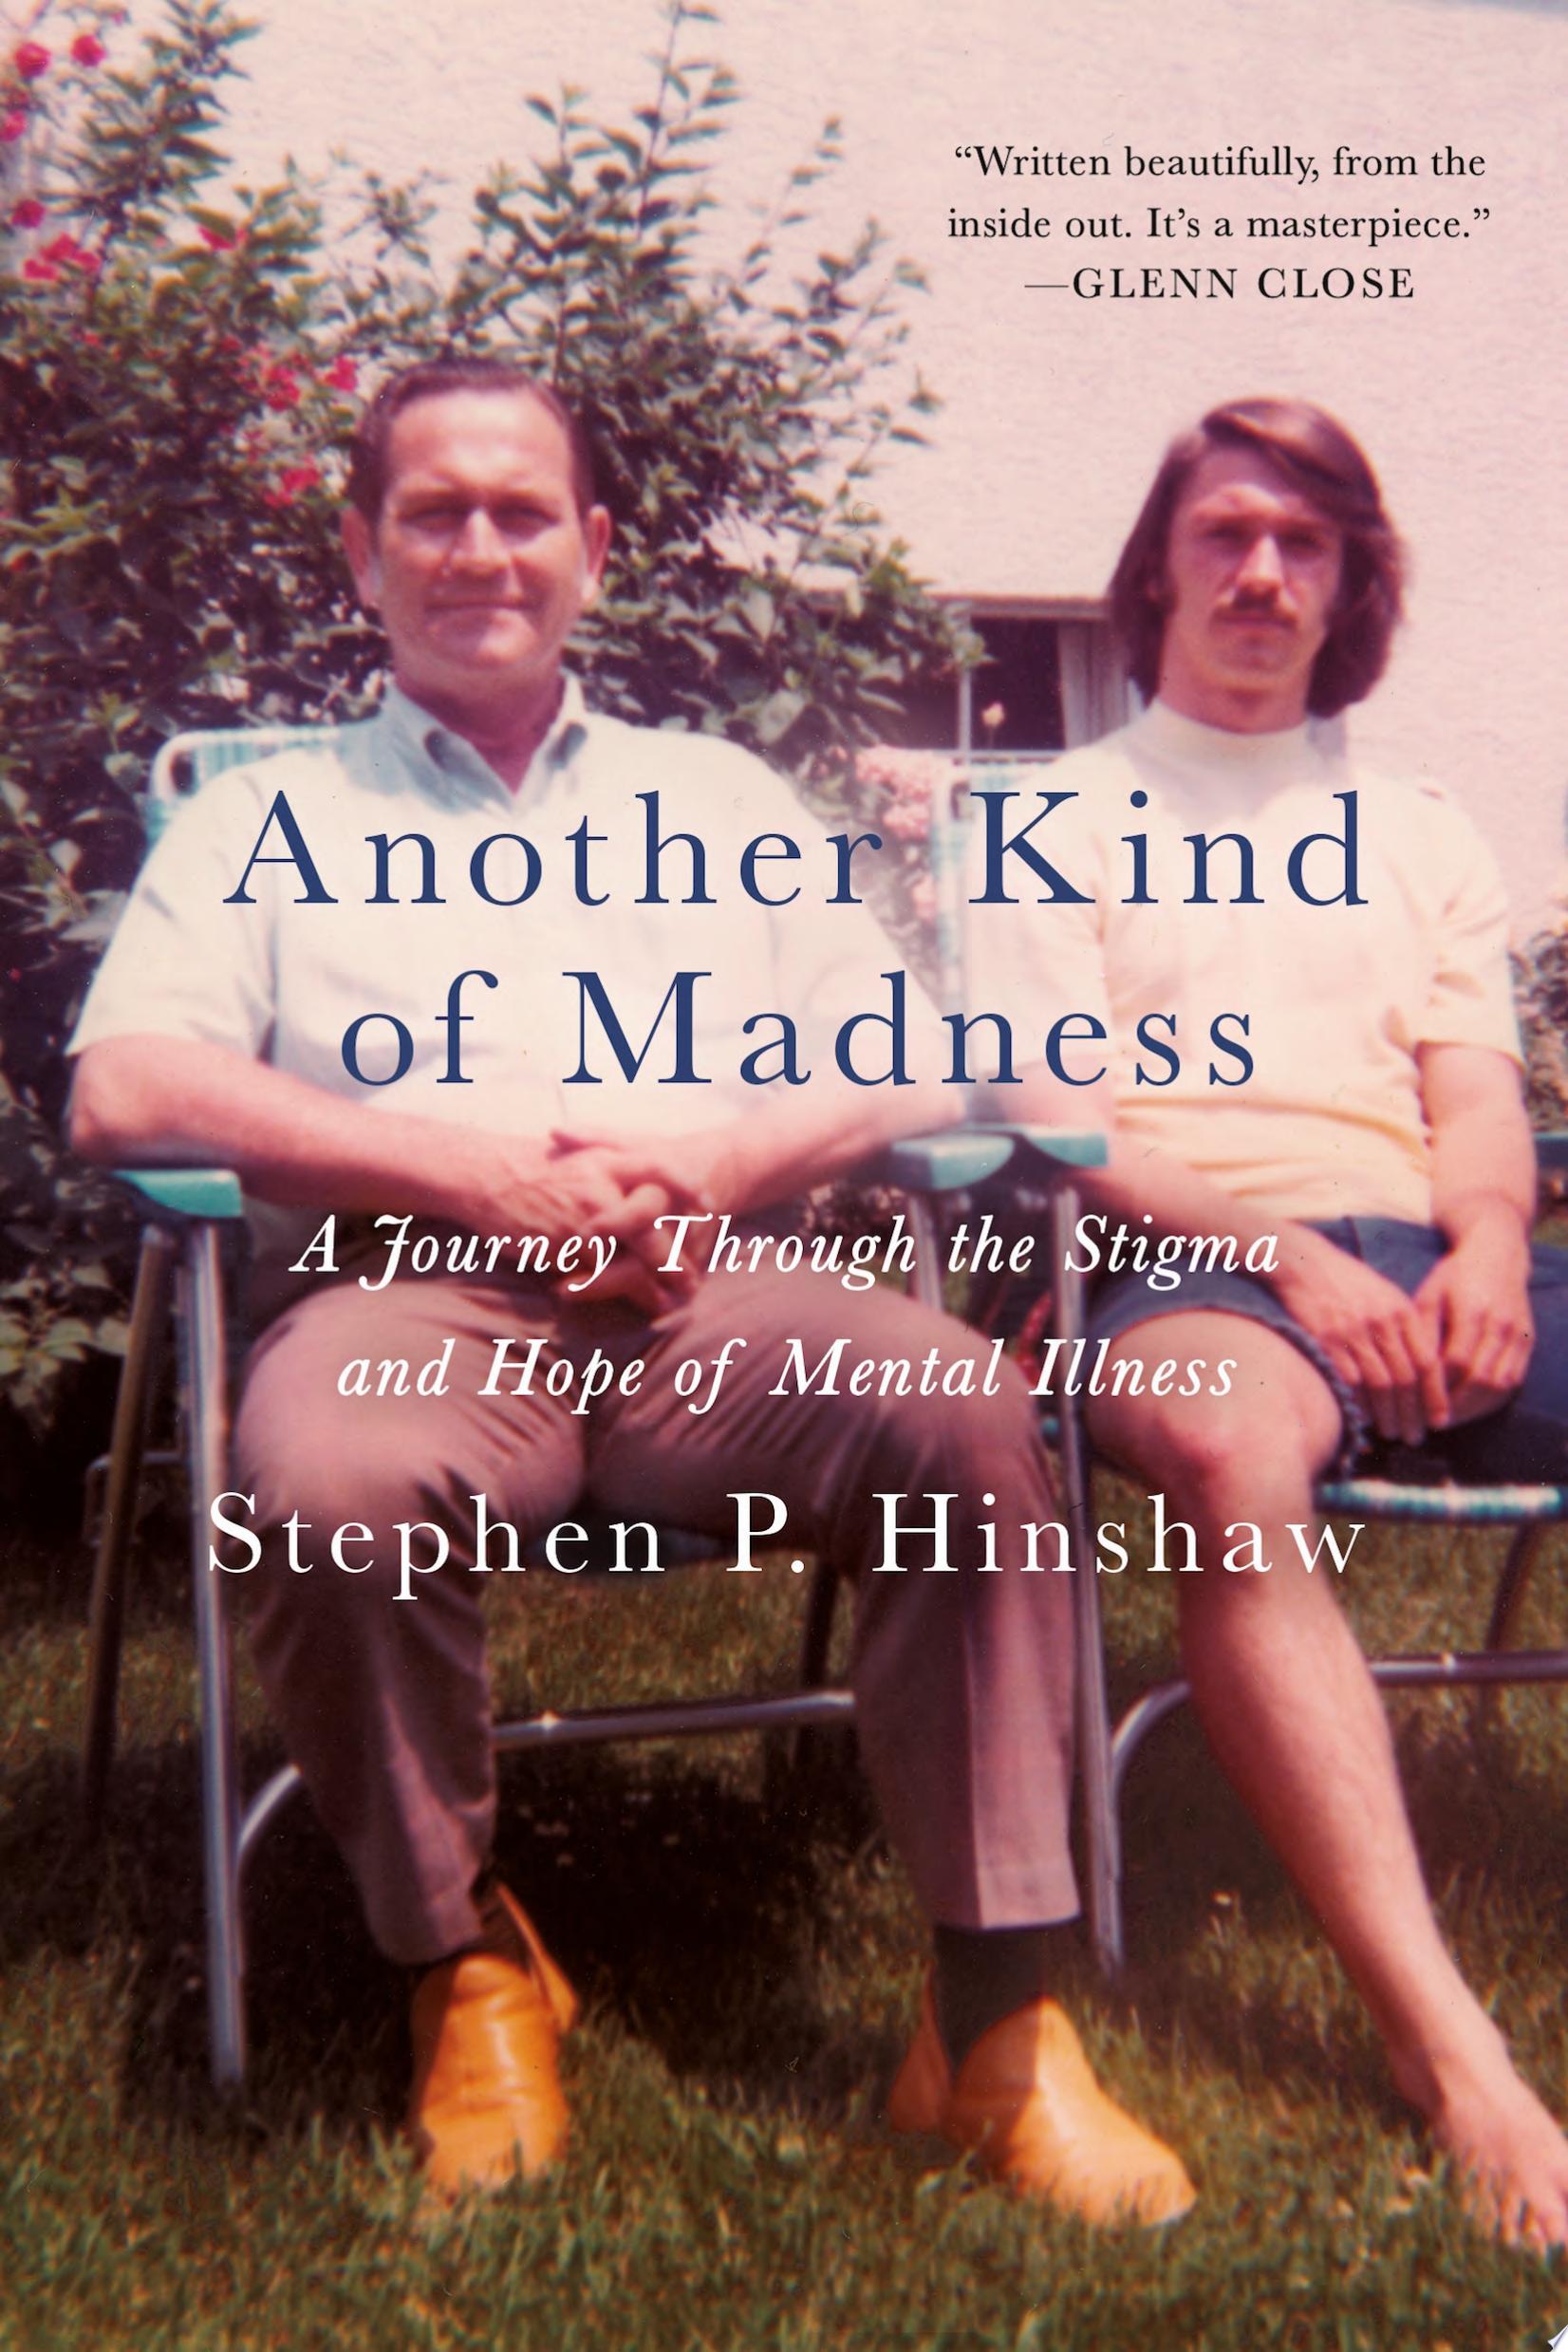 Image for "Another Kind of Madness"